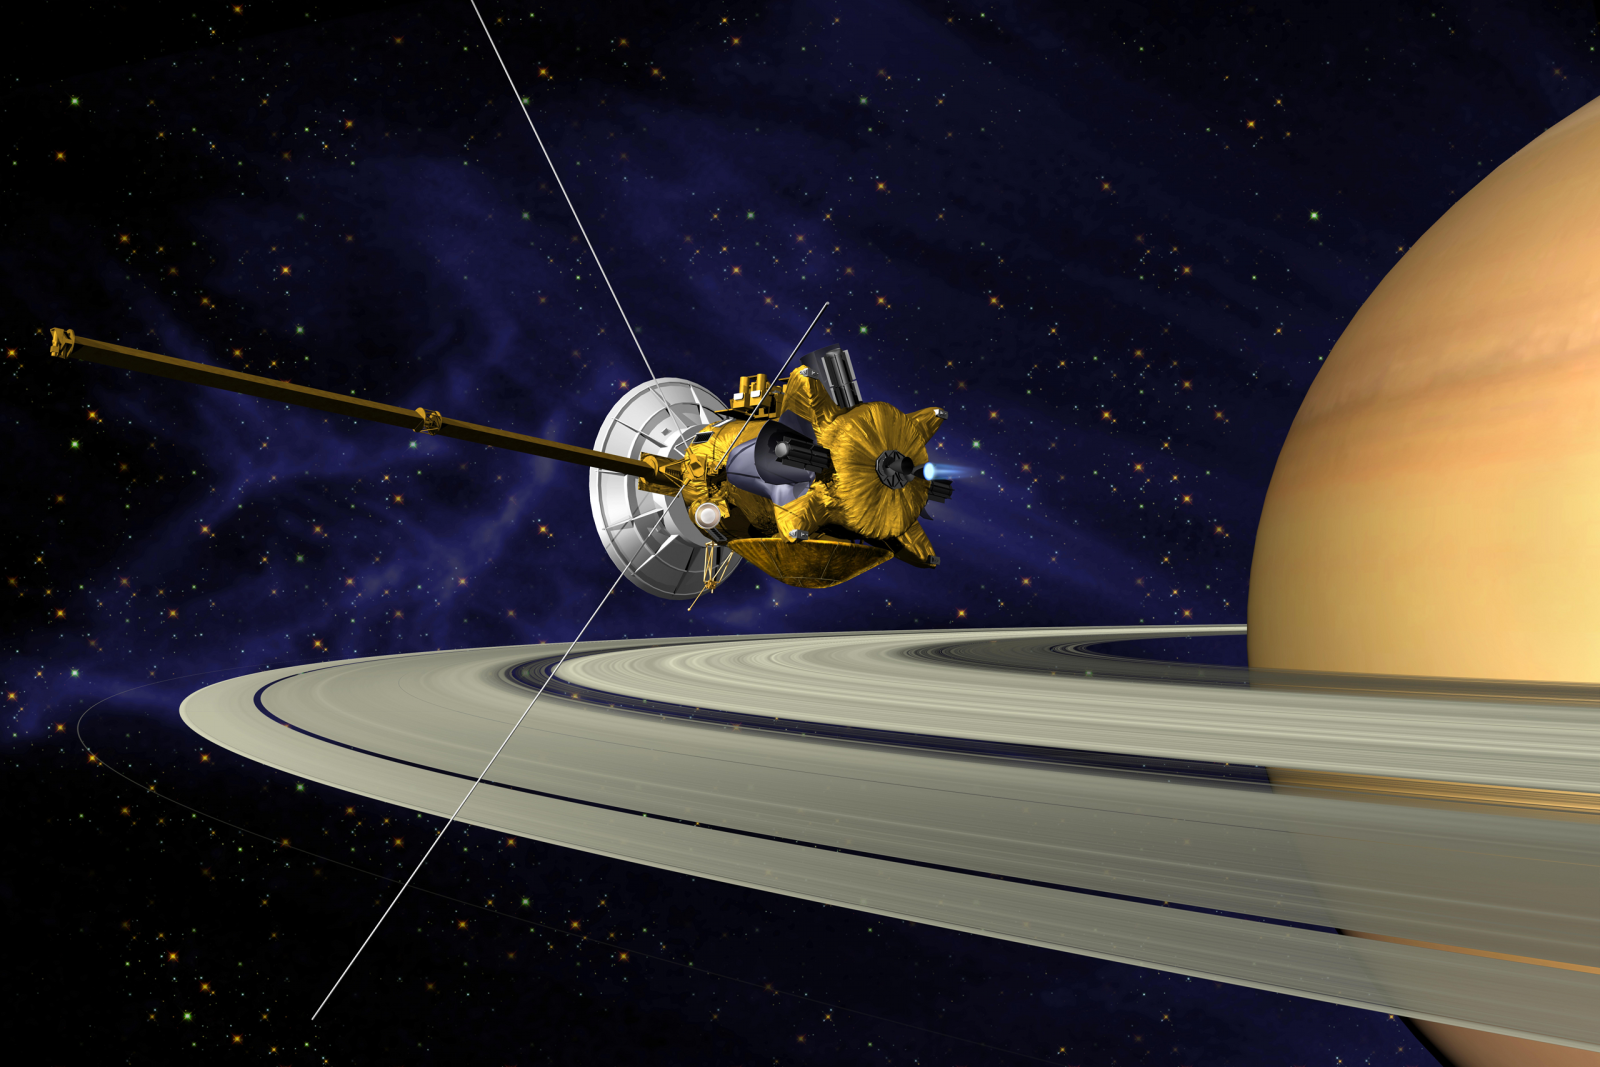 One of our flagship scientific projects, the Cassini-Huygens spacecraft is seen here arriving in orbit of Saturn in late 2002, about 5 years and several gravity assist flybys of Venus, Earth and Jupiter after launch.  Along with collecting amazing data and spectacular imagery of Saturn, its rings and moons, the spacecraft deployed the Huygens probe to land on the surface of Titan, one of the major moons.  (This of course is an artist's rendition; sadly we did not have an interplanetary 'chase plane'.)